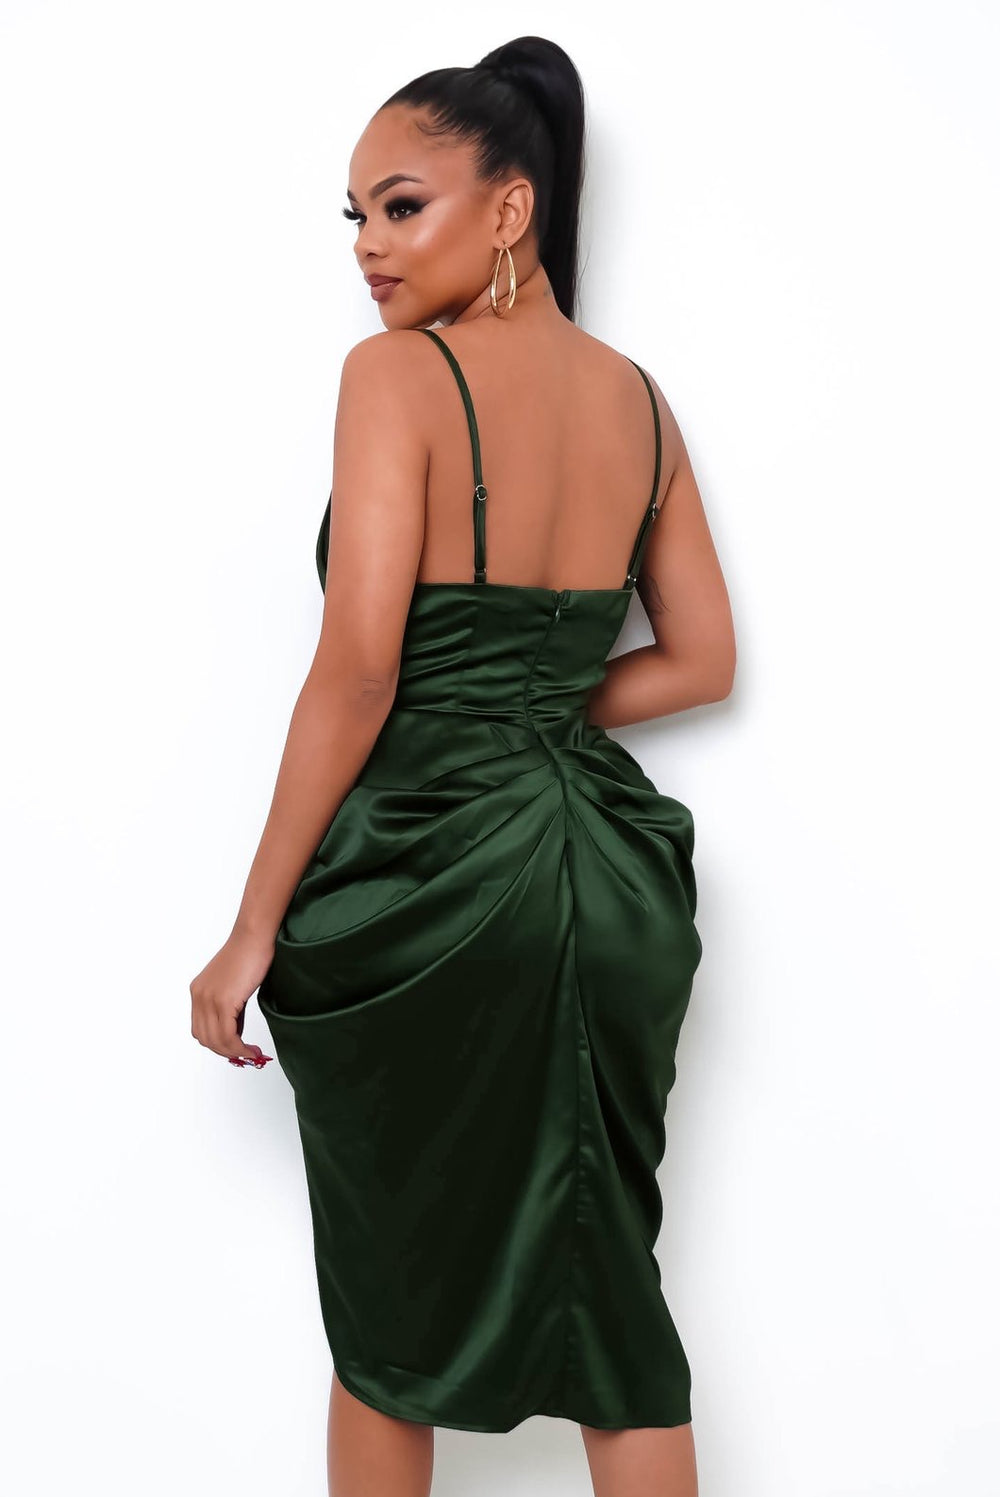 Here To Party Dress || Green - Rehabcouture